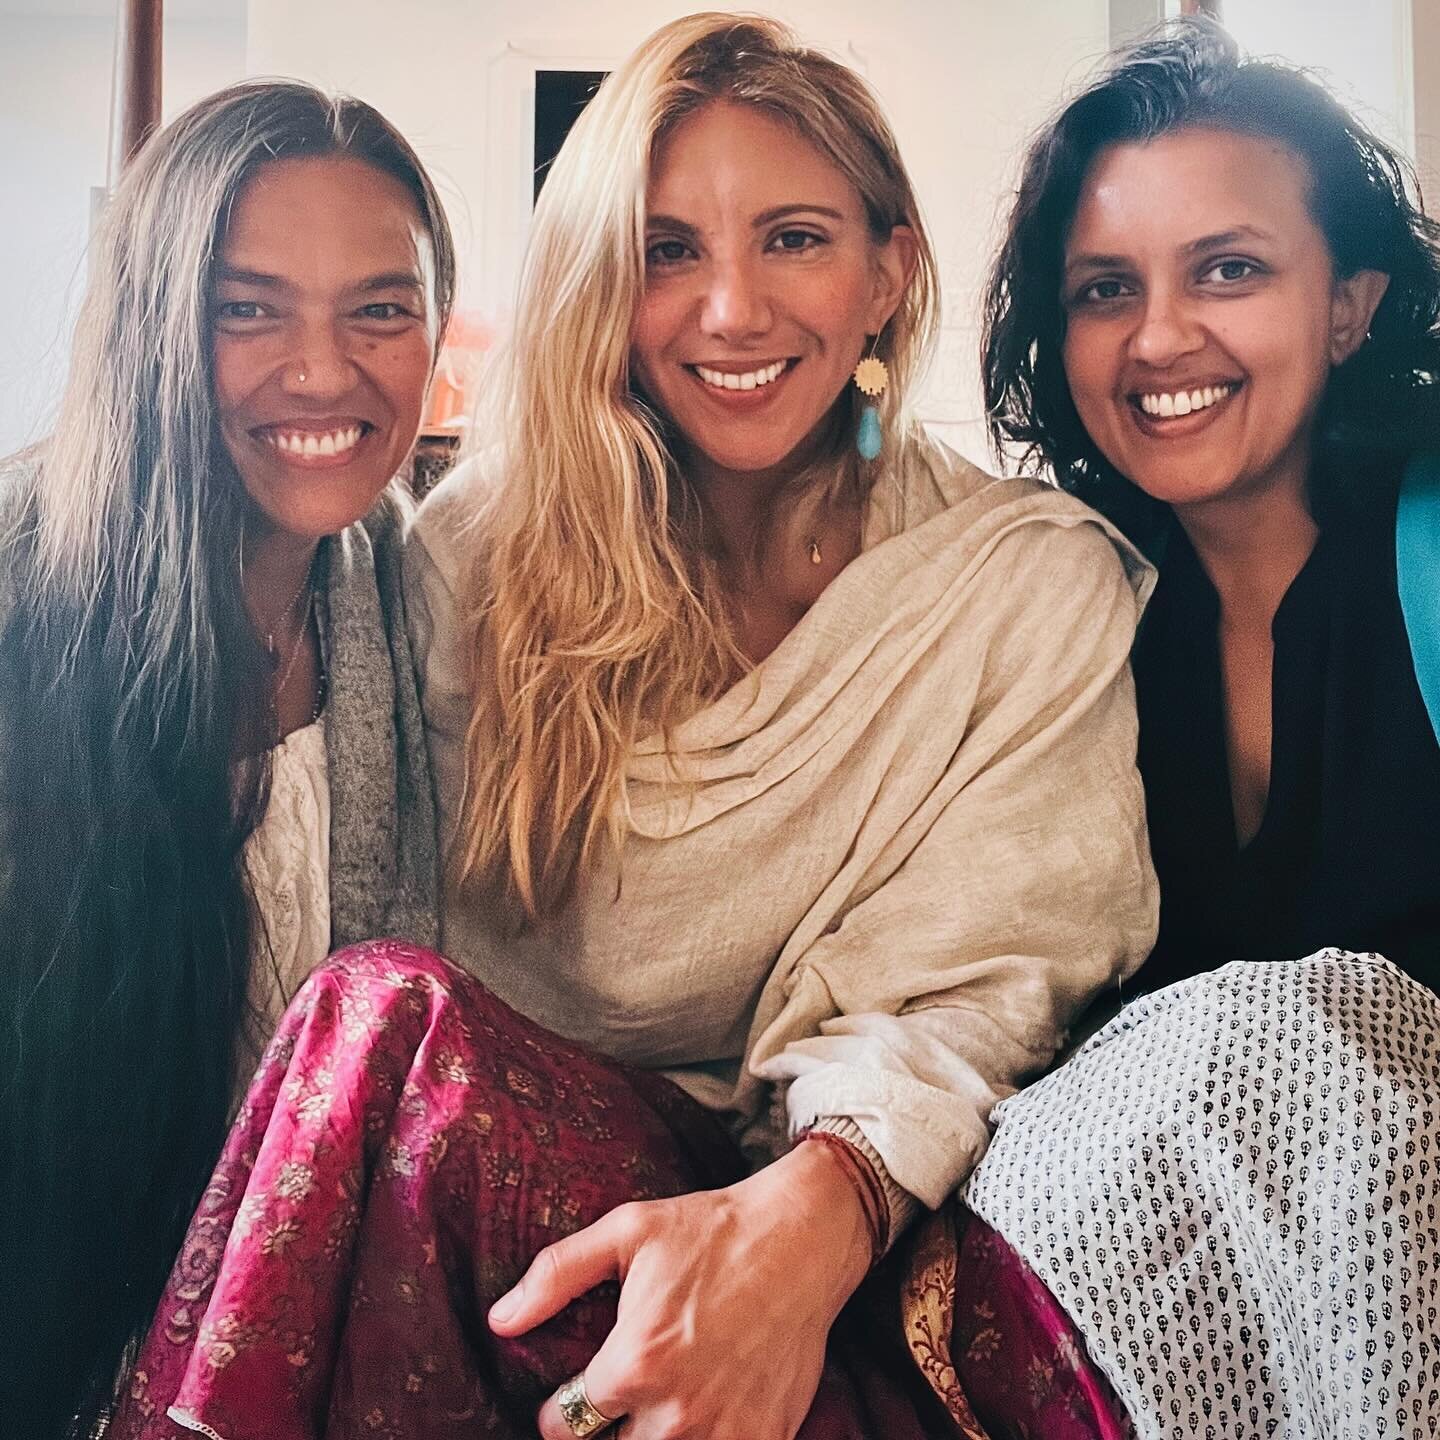 Hermanas Sagradas were born on this auspicious weekend of women&rsquo;s day, Debbie&rsquo;s B- day and Mahashivaratri. Forever grateful for my new sisters.

🔱🤲🏽🦎
Smooches
Rudram
Meenakshi Temple
Beginnings

🌬️🌱🔥💦